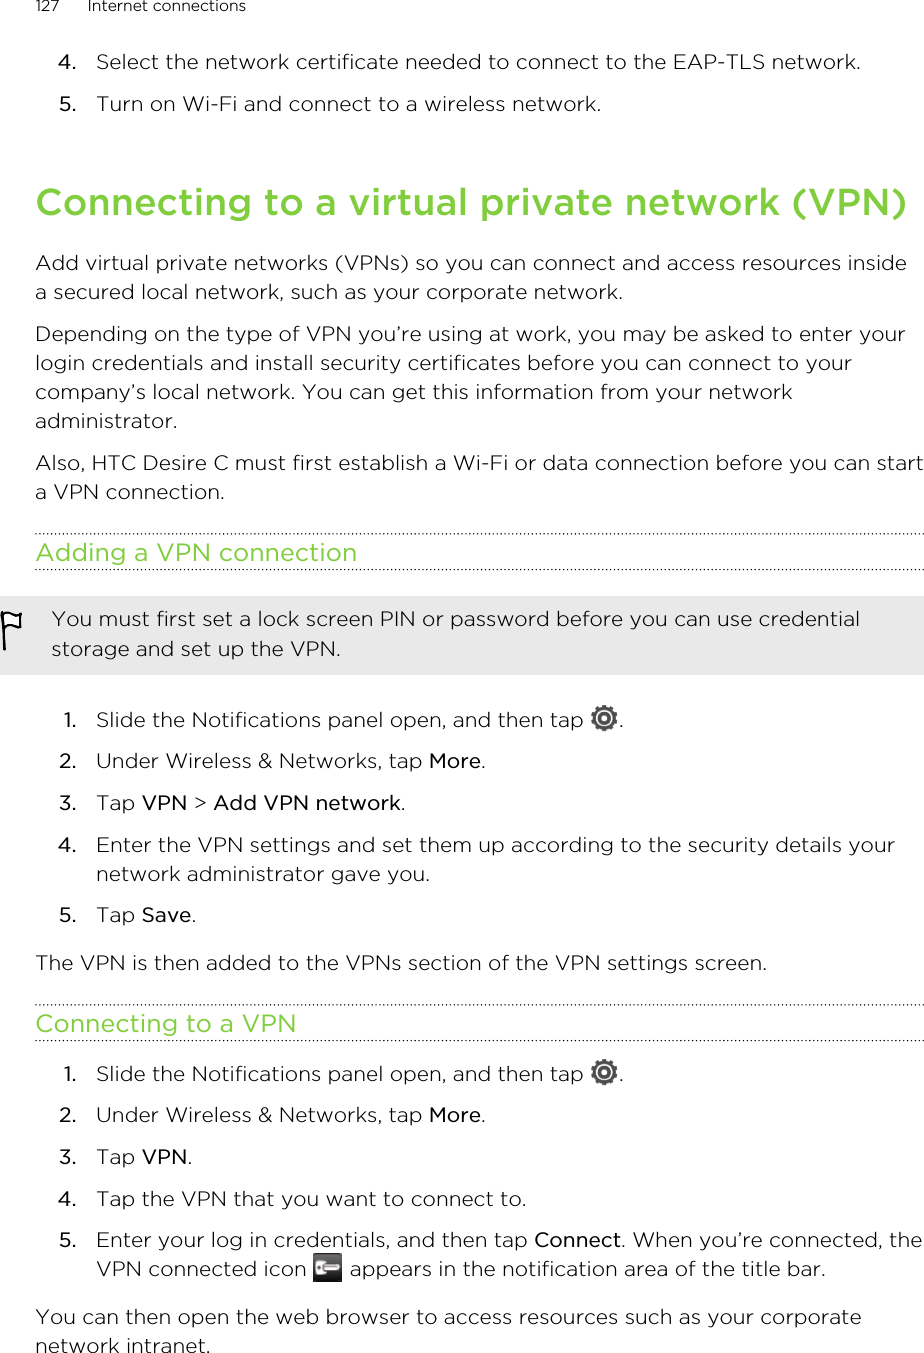 4. Select the network certificate needed to connect to the EAP-TLS network.5. Turn on Wi-Fi and connect to a wireless network.Connecting to a virtual private network (VPN)Add virtual private networks (VPNs) so you can connect and access resources insidea secured local network, such as your corporate network.Depending on the type of VPN you’re using at work, you may be asked to enter yourlogin credentials and install security certificates before you can connect to yourcompany’s local network. You can get this information from your networkadministrator.Also, HTC Desire C must first establish a Wi-Fi or data connection before you can starta VPN connection.Adding a VPN connectionYou must first set a lock screen PIN or password before you can use credentialstorage and set up the VPN.1. Slide the Notifications panel open, and then tap  .2. Under Wireless &amp; Networks, tap More.3. Tap VPN &gt; Add VPN network.4. Enter the VPN settings and set them up according to the security details yournetwork administrator gave you.5. Tap Save.The VPN is then added to the VPNs section of the VPN settings screen.Connecting to a VPN1. Slide the Notifications panel open, and then tap  .2. Under Wireless &amp; Networks, tap More.3. Tap VPN.4. Tap the VPN that you want to connect to.5. Enter your log in credentials, and then tap Connect. When you’re connected, theVPN connected icon   appears in the notification area of the title bar.You can then open the web browser to access resources such as your corporatenetwork intranet.127 Internet connections